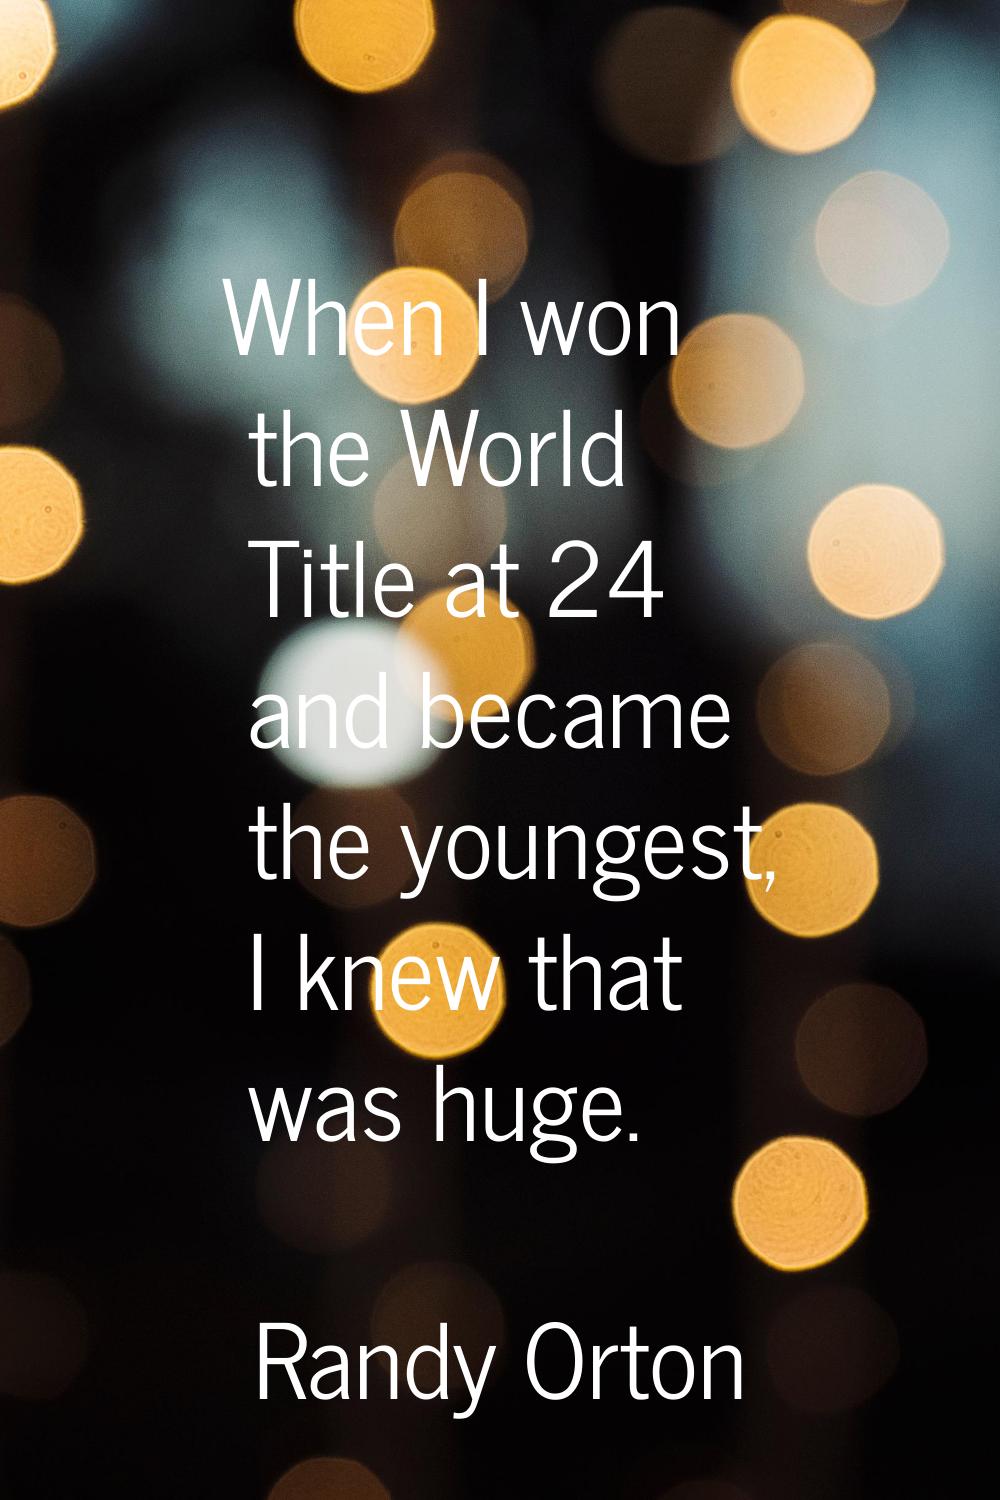 When I won the World Title at 24 and became the youngest, I knew that was huge.